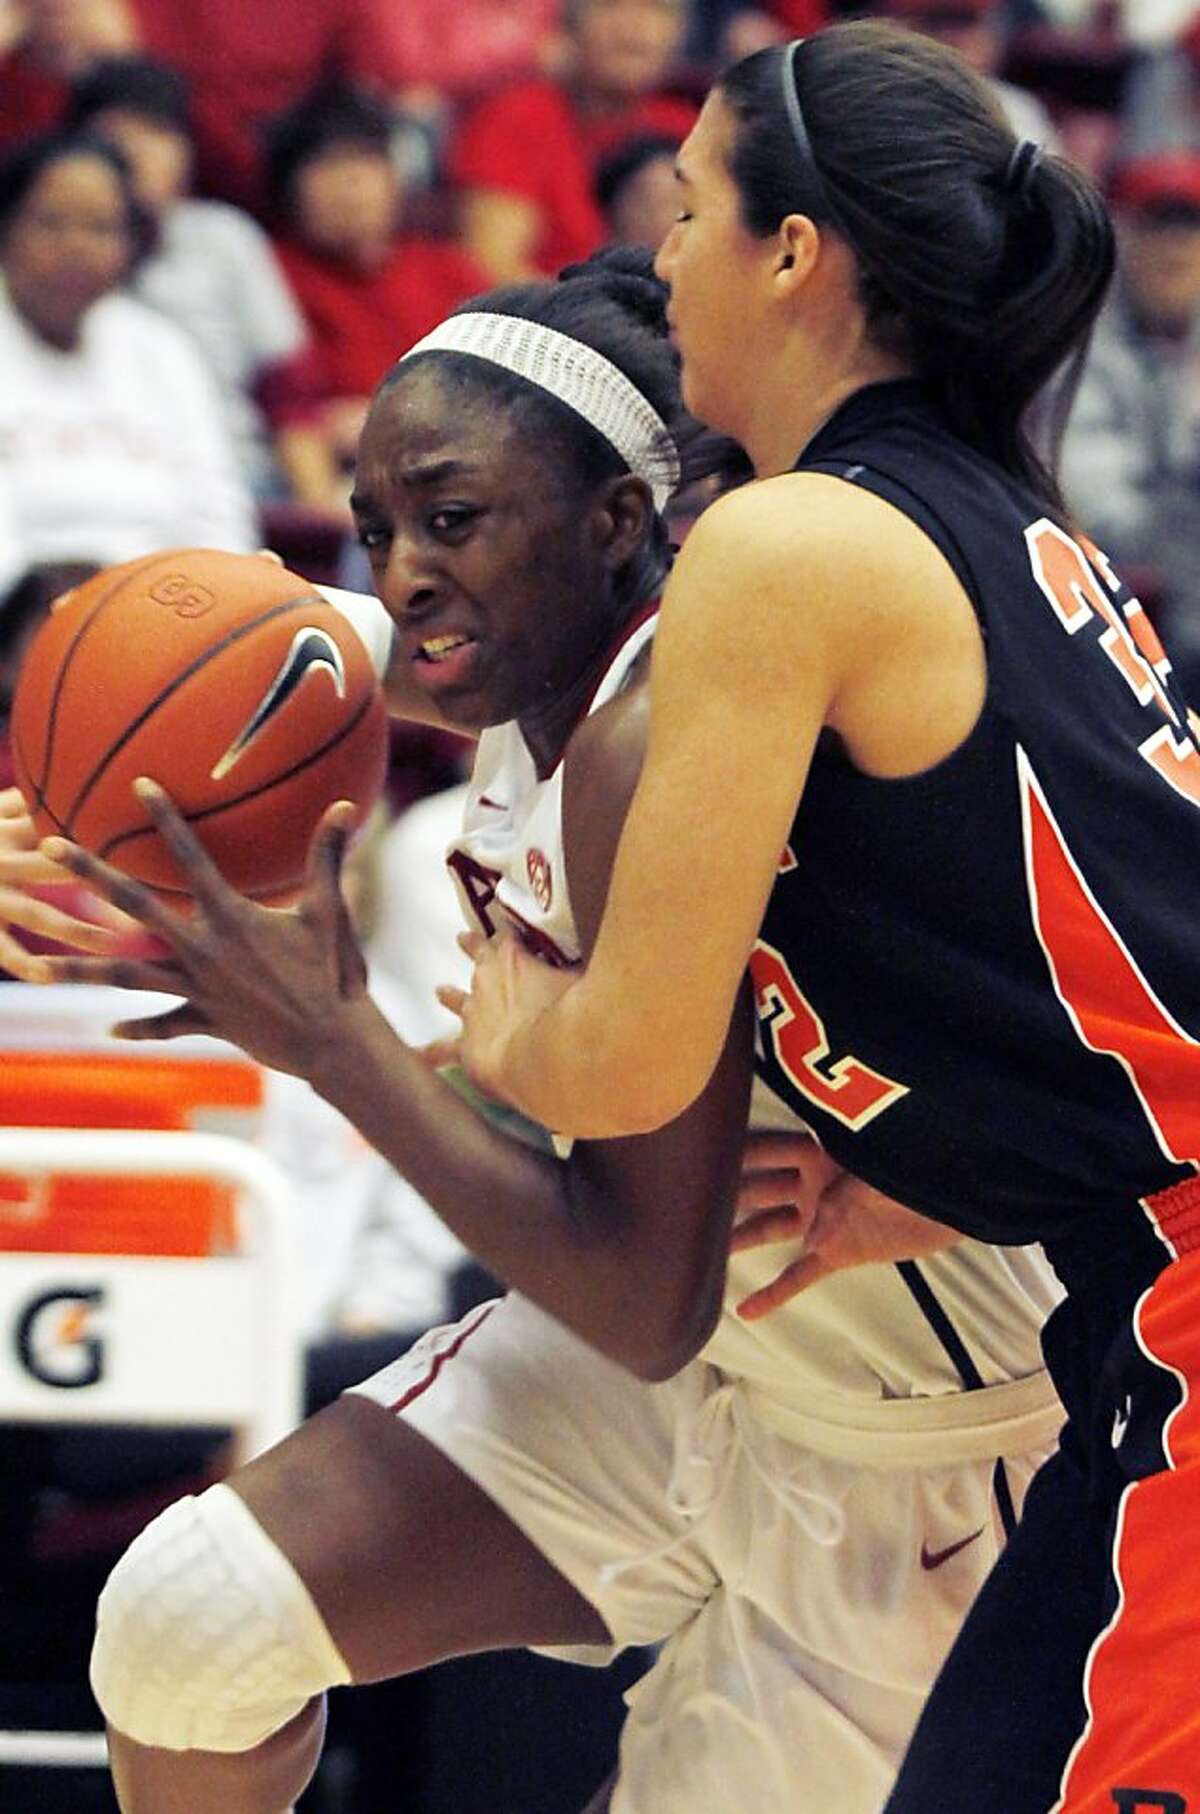 Stanford's Nnemkadi Ogwumike, left, drives against Princeton's Kristen Helmstetter during the second half of an NCAA college basketball game, Saturday, Dec. 17, 2011 in Stanford, Calif. Stanford defeated Princeton 85-66. (AP Photo/George Nikitin)